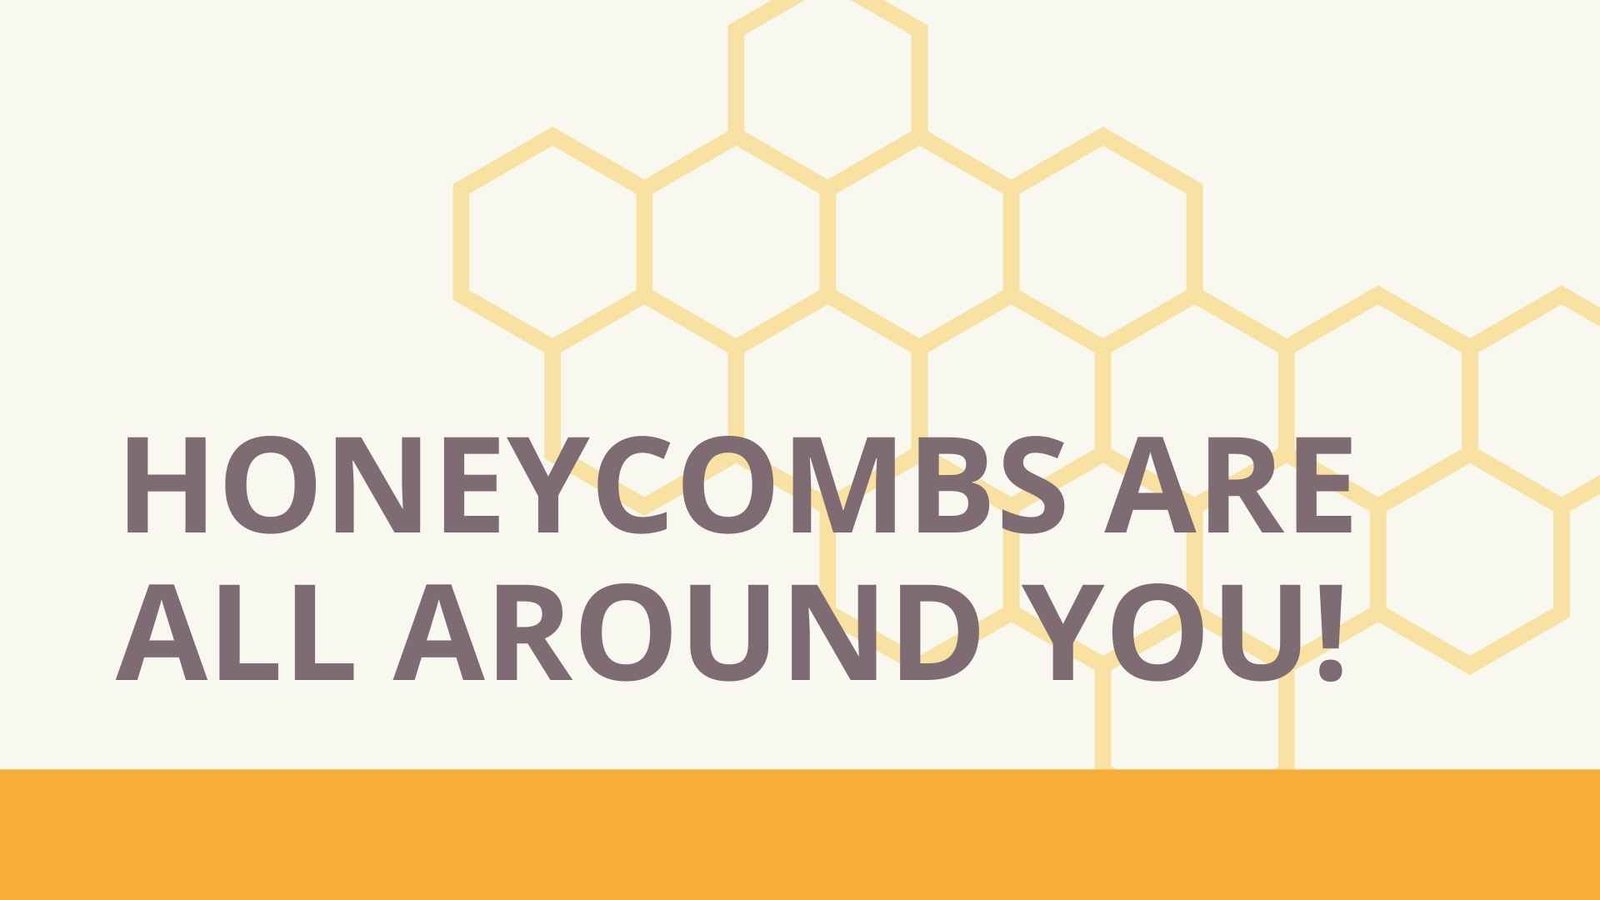 honeycombs are all around you